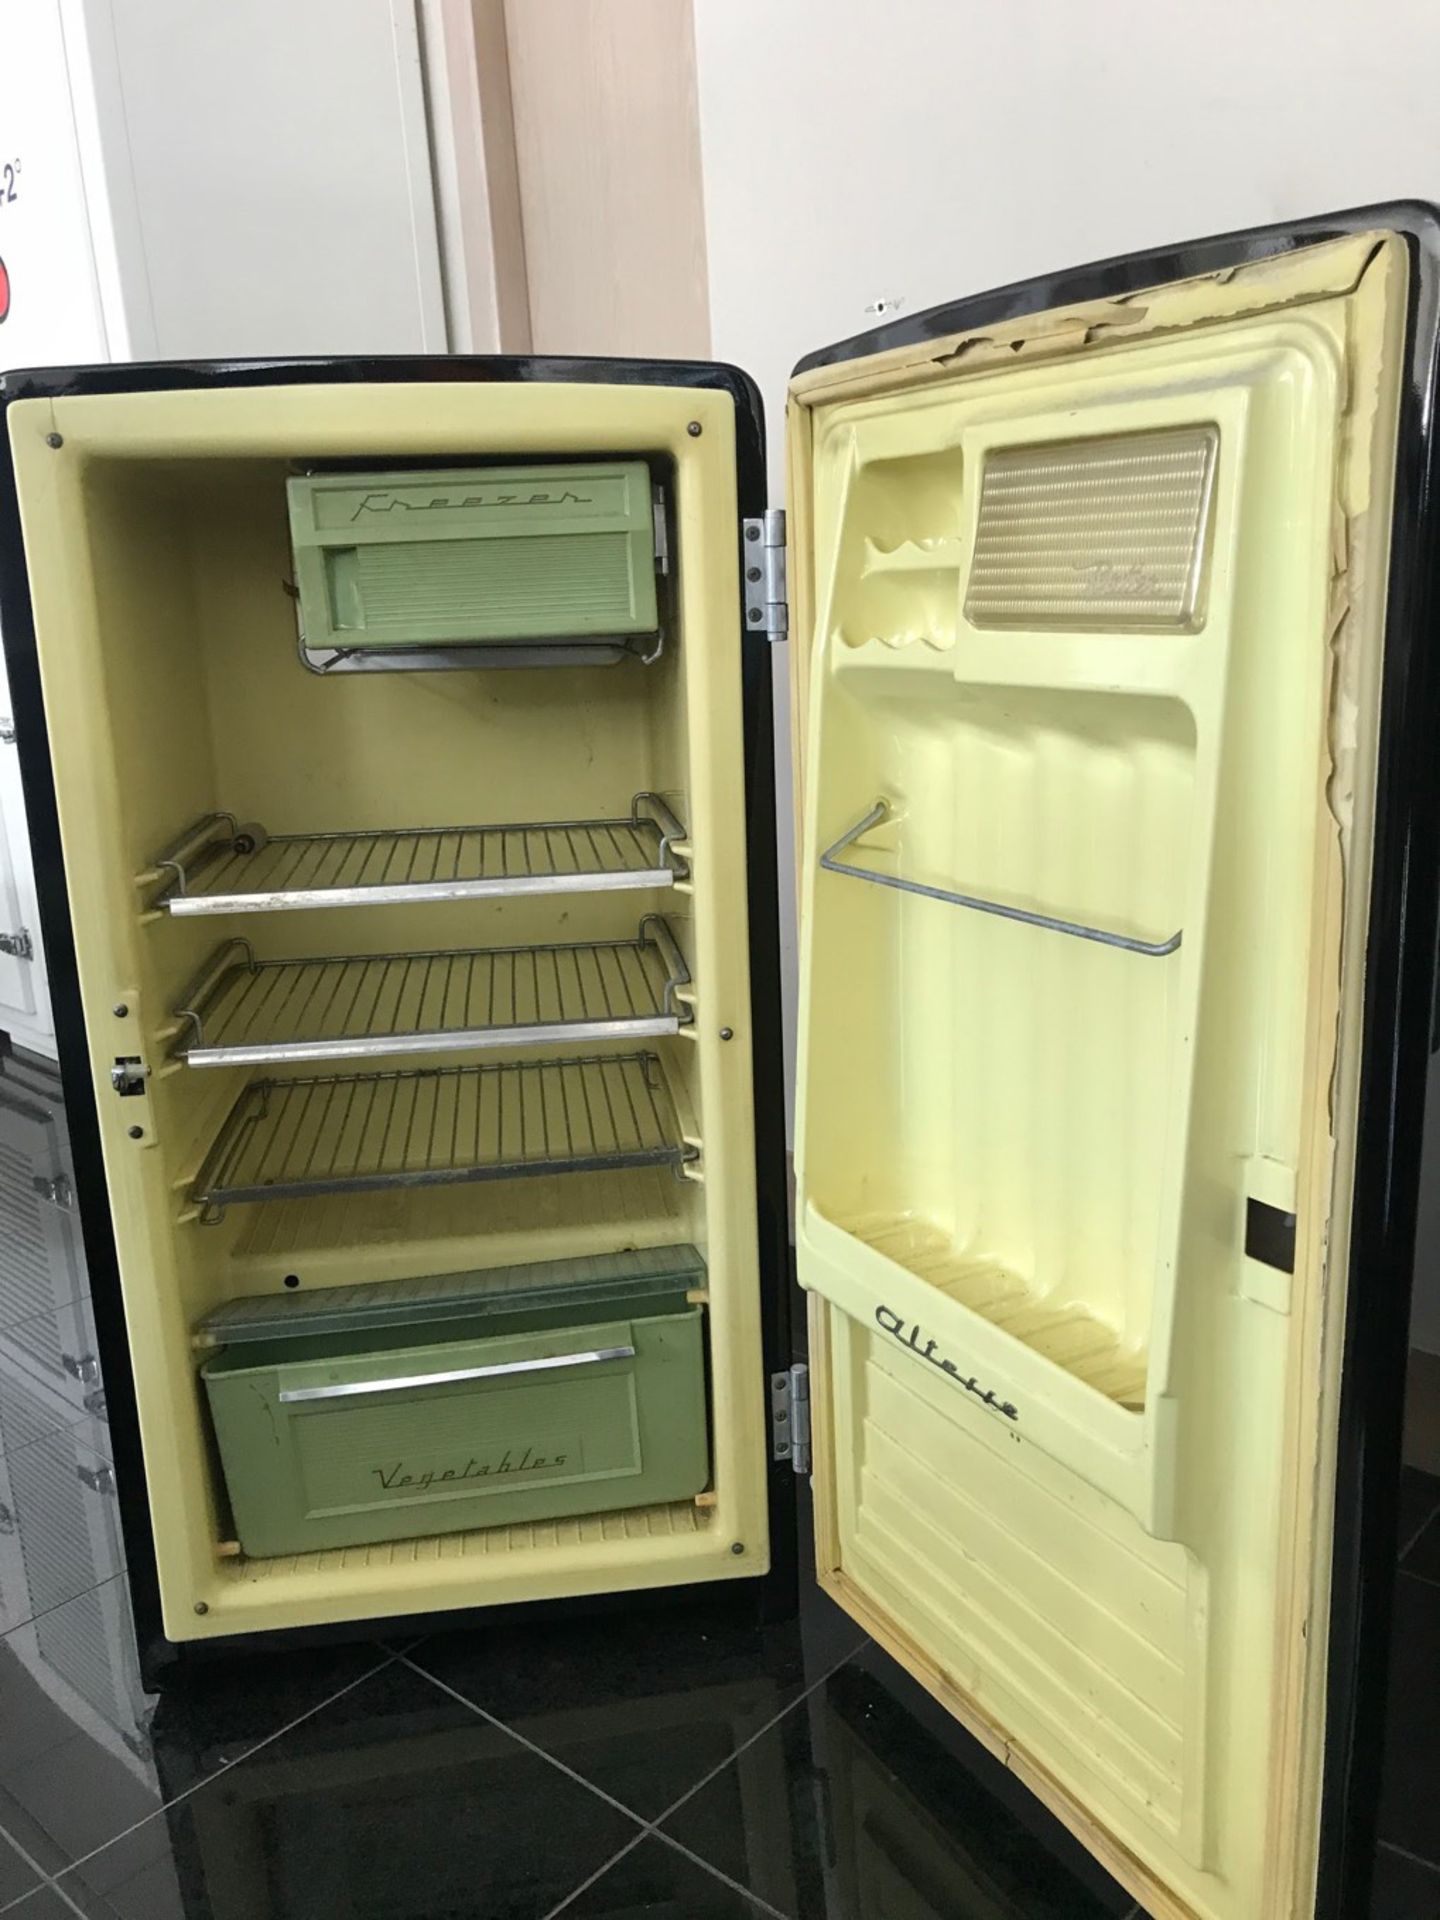 1958 Frigeco Refrigerator in Glossy Black Color - Image 2 of 2